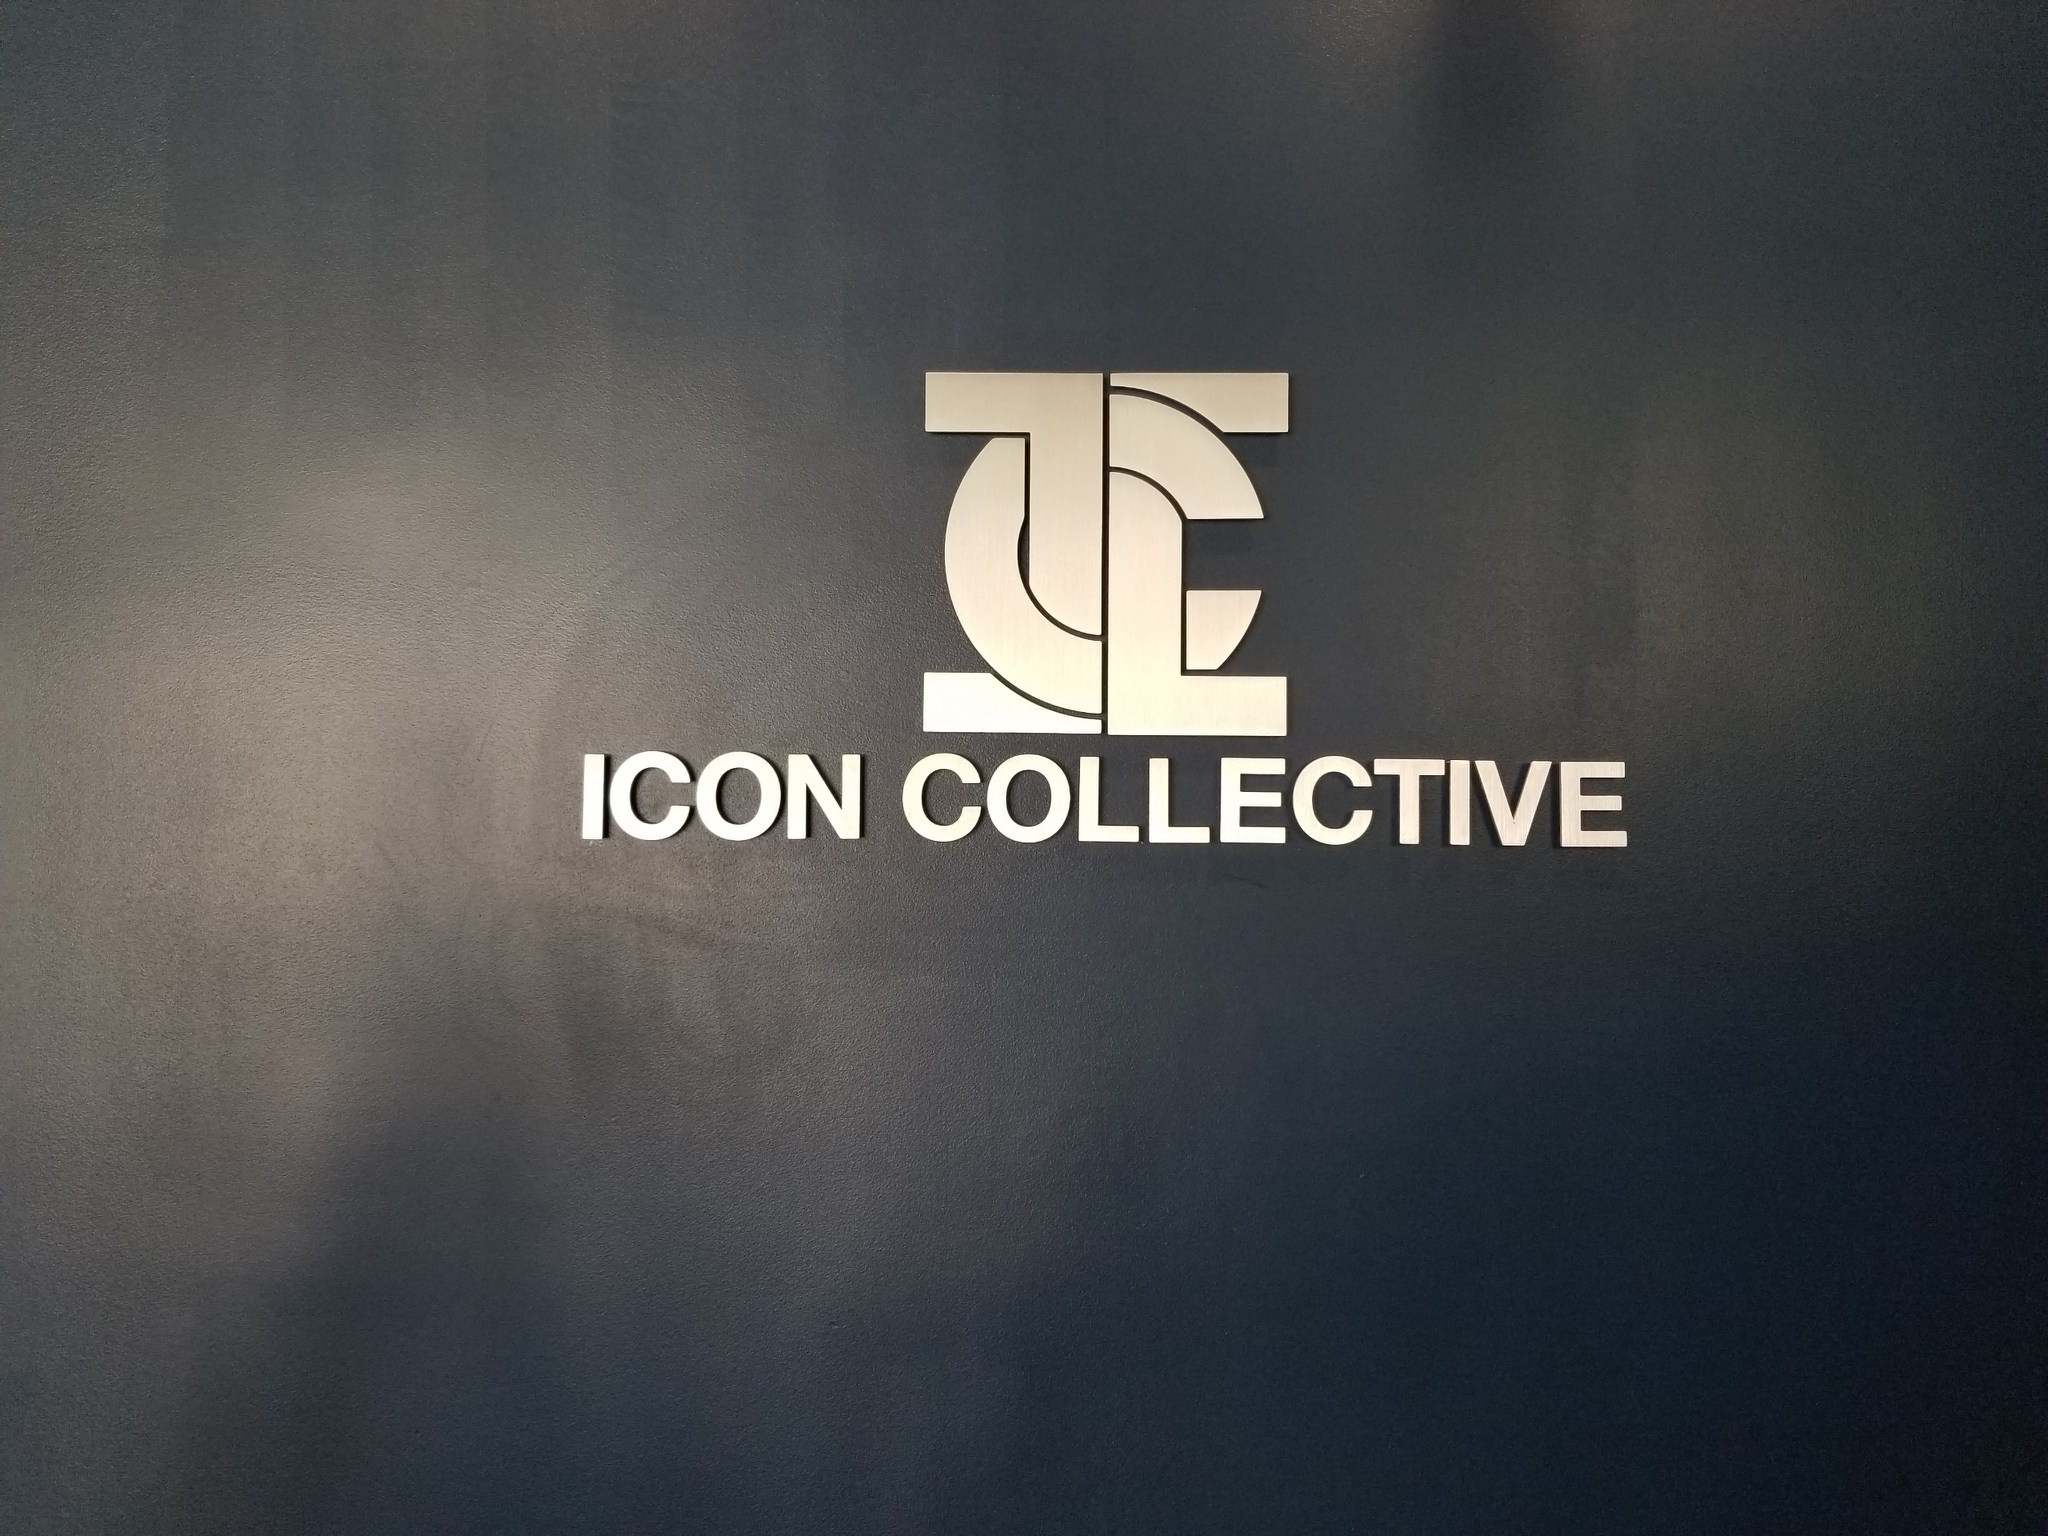 You are currently viewing Metal School Lobby Sign and Business Sign Package for Icon Collective in Burbank